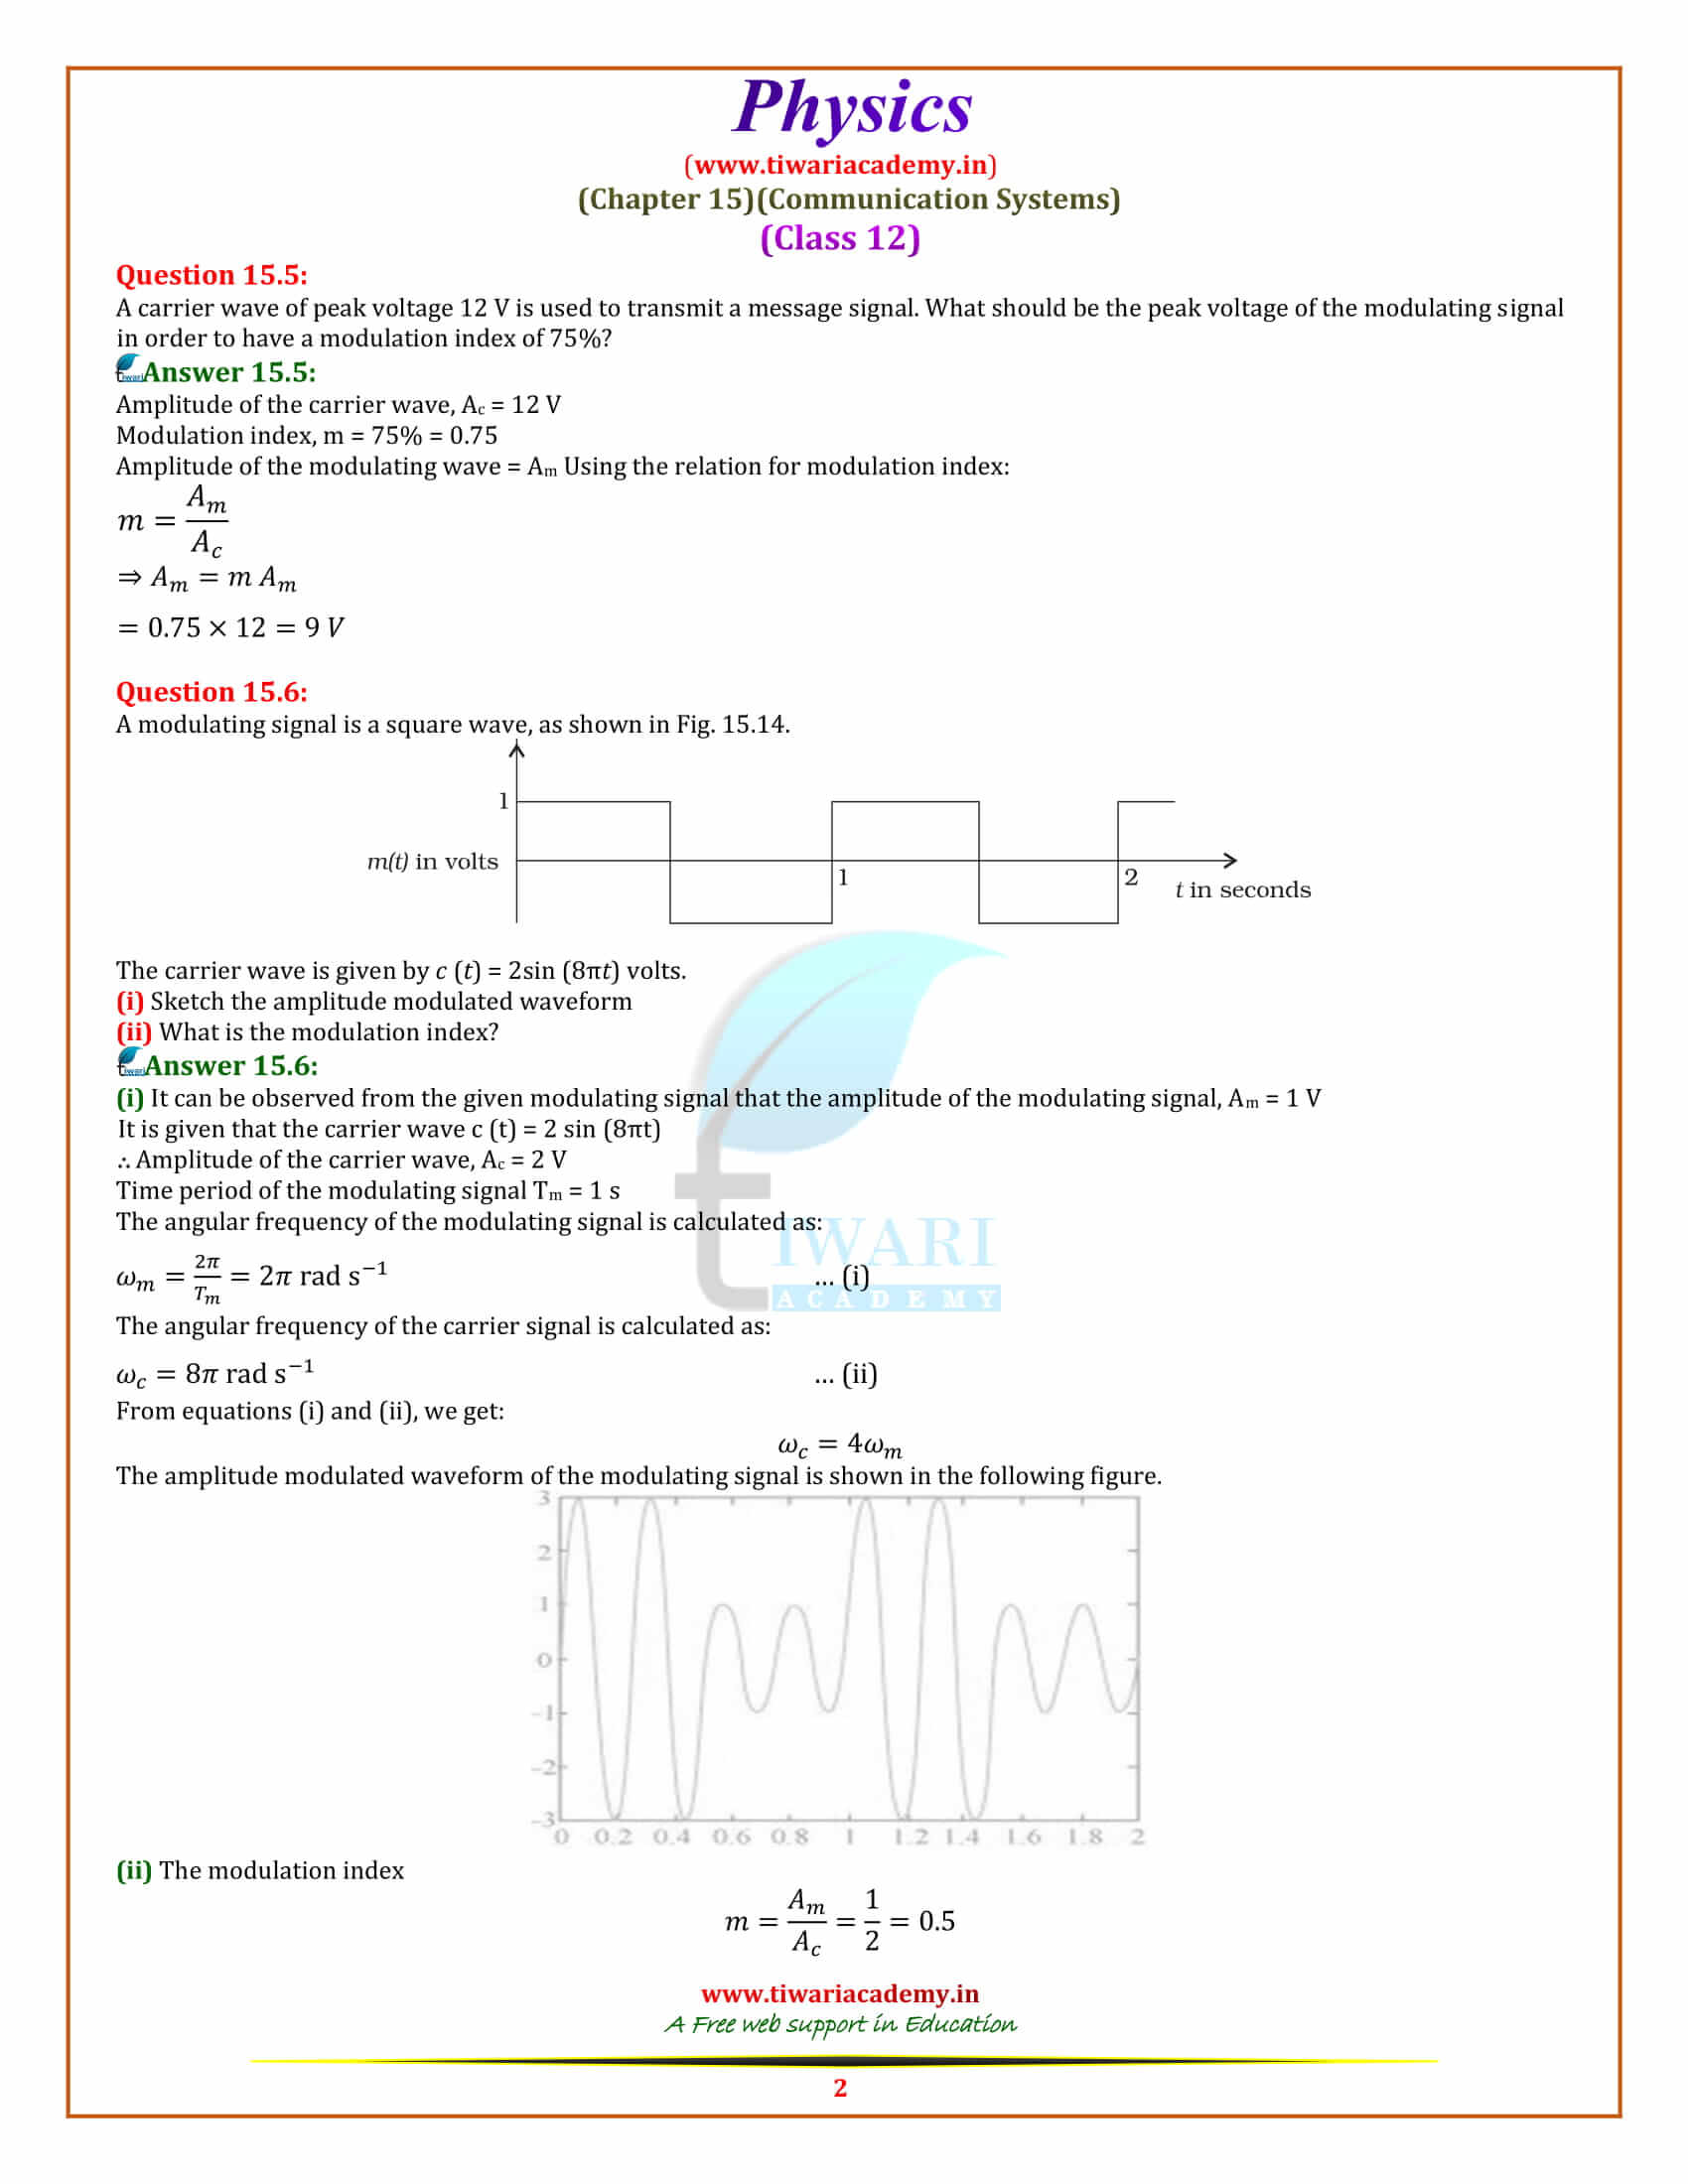 NCERT Solutions for Class 12 Physics Chapter 15 Communication Systems free download in pdf